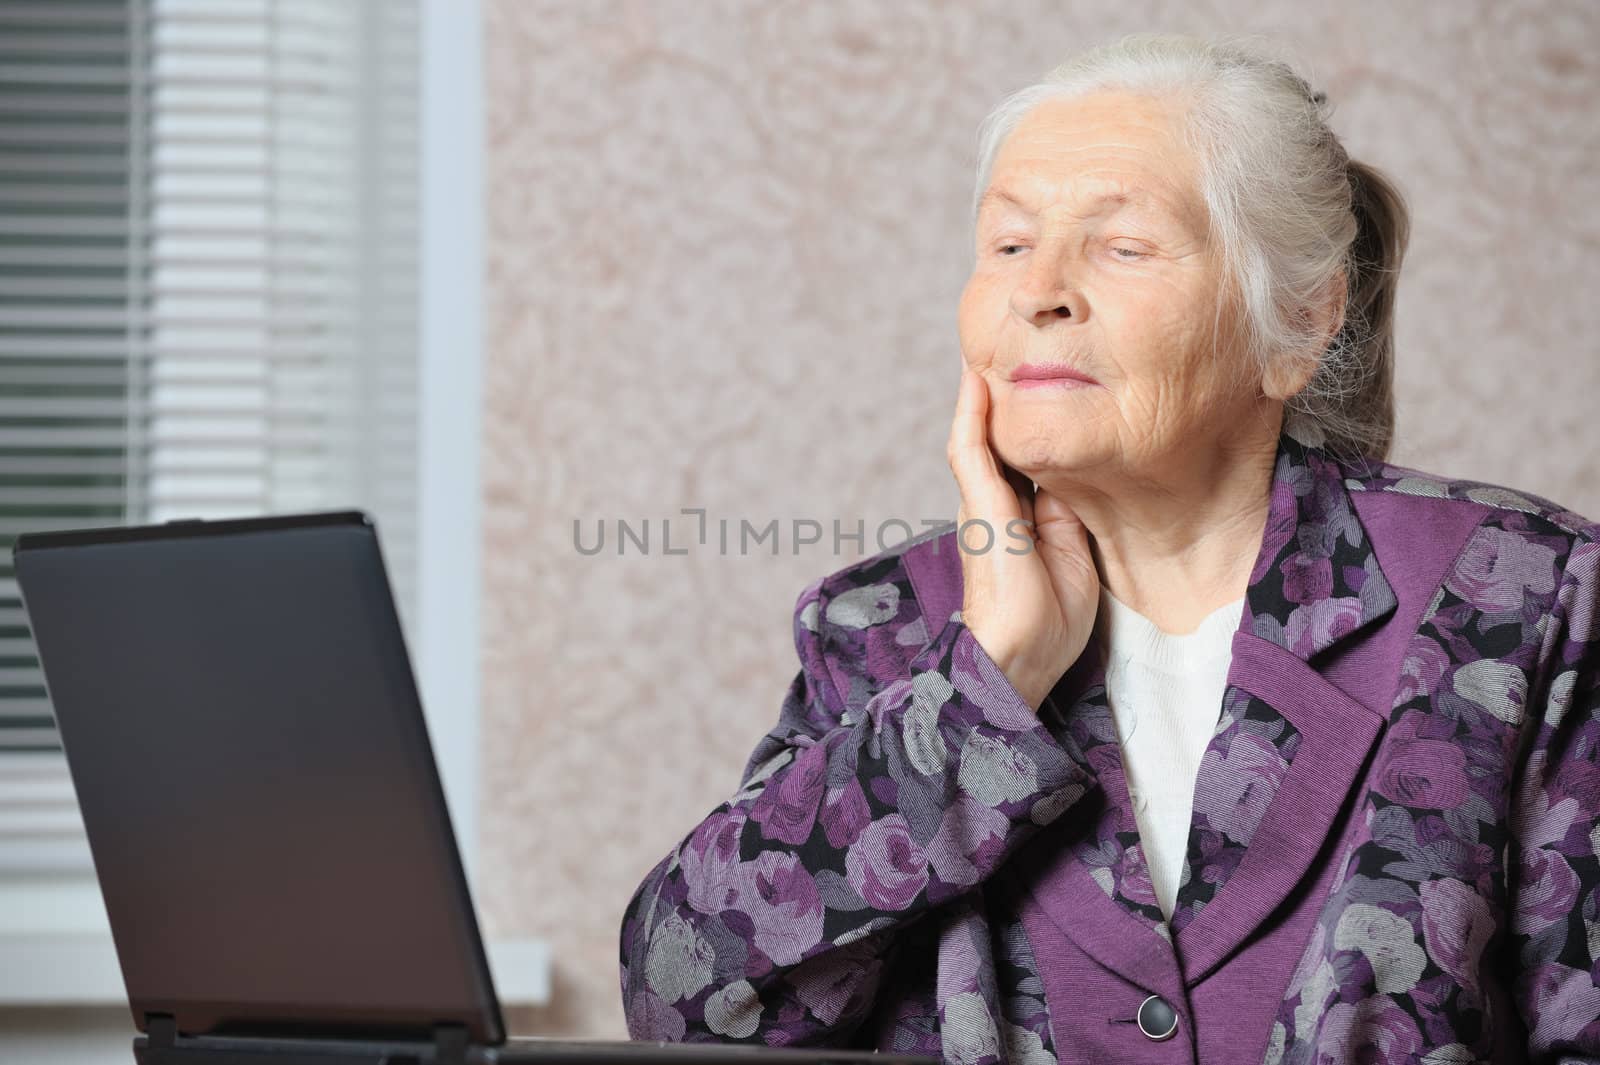 The elderly woman in front of the laptop by galdzer